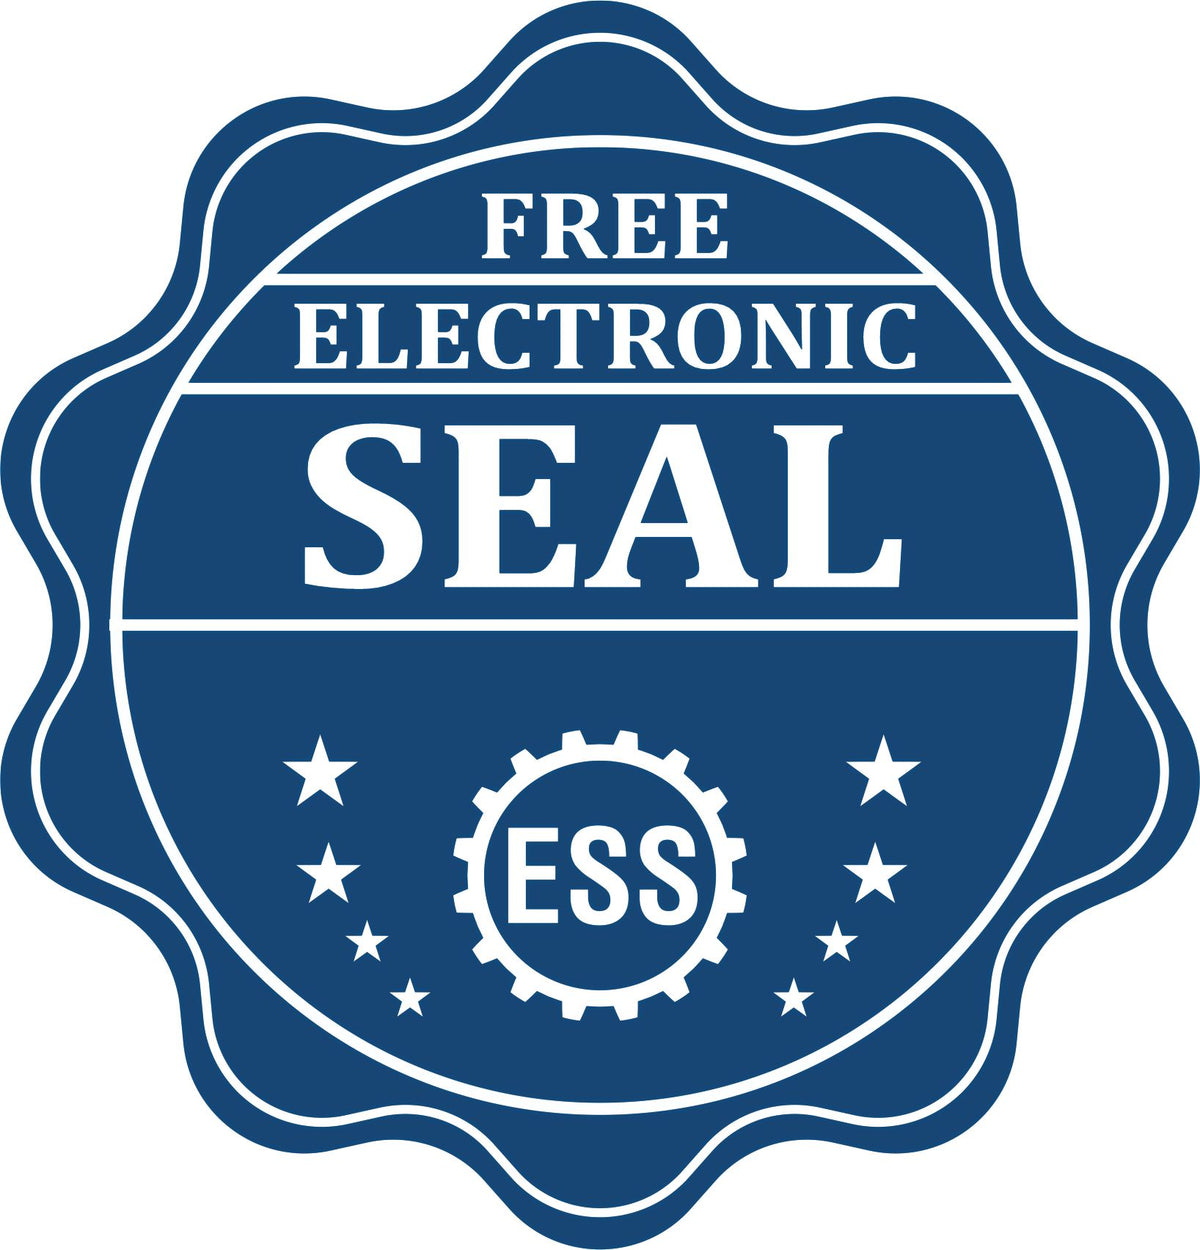 A badge showing a free electronic seal for the MaxLight Premium Pre-Inked Nebraska State Seal Notarial Stamp with stars and the ESS gear on the emblem.